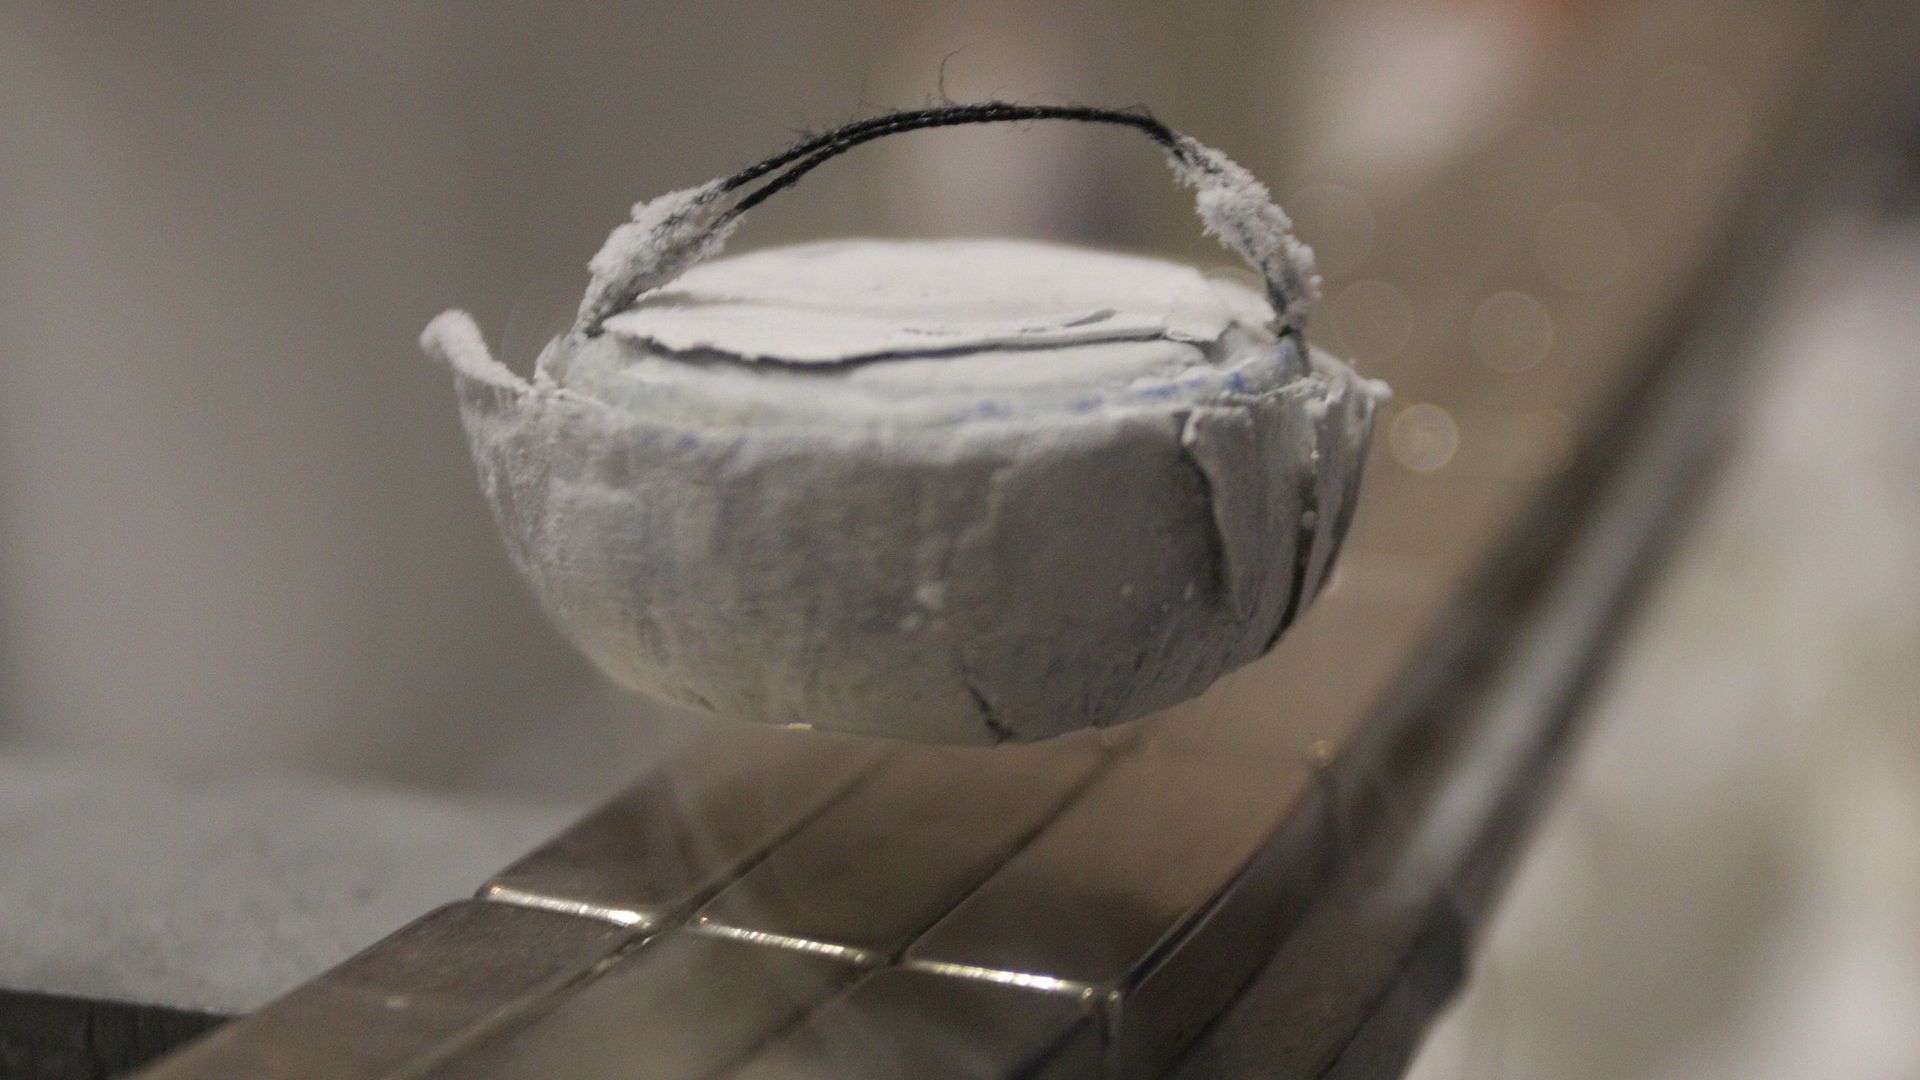 Controversy Surrounds Discovery of Room-Temperature Superconductor: Possible Fraud and Request for Retraction